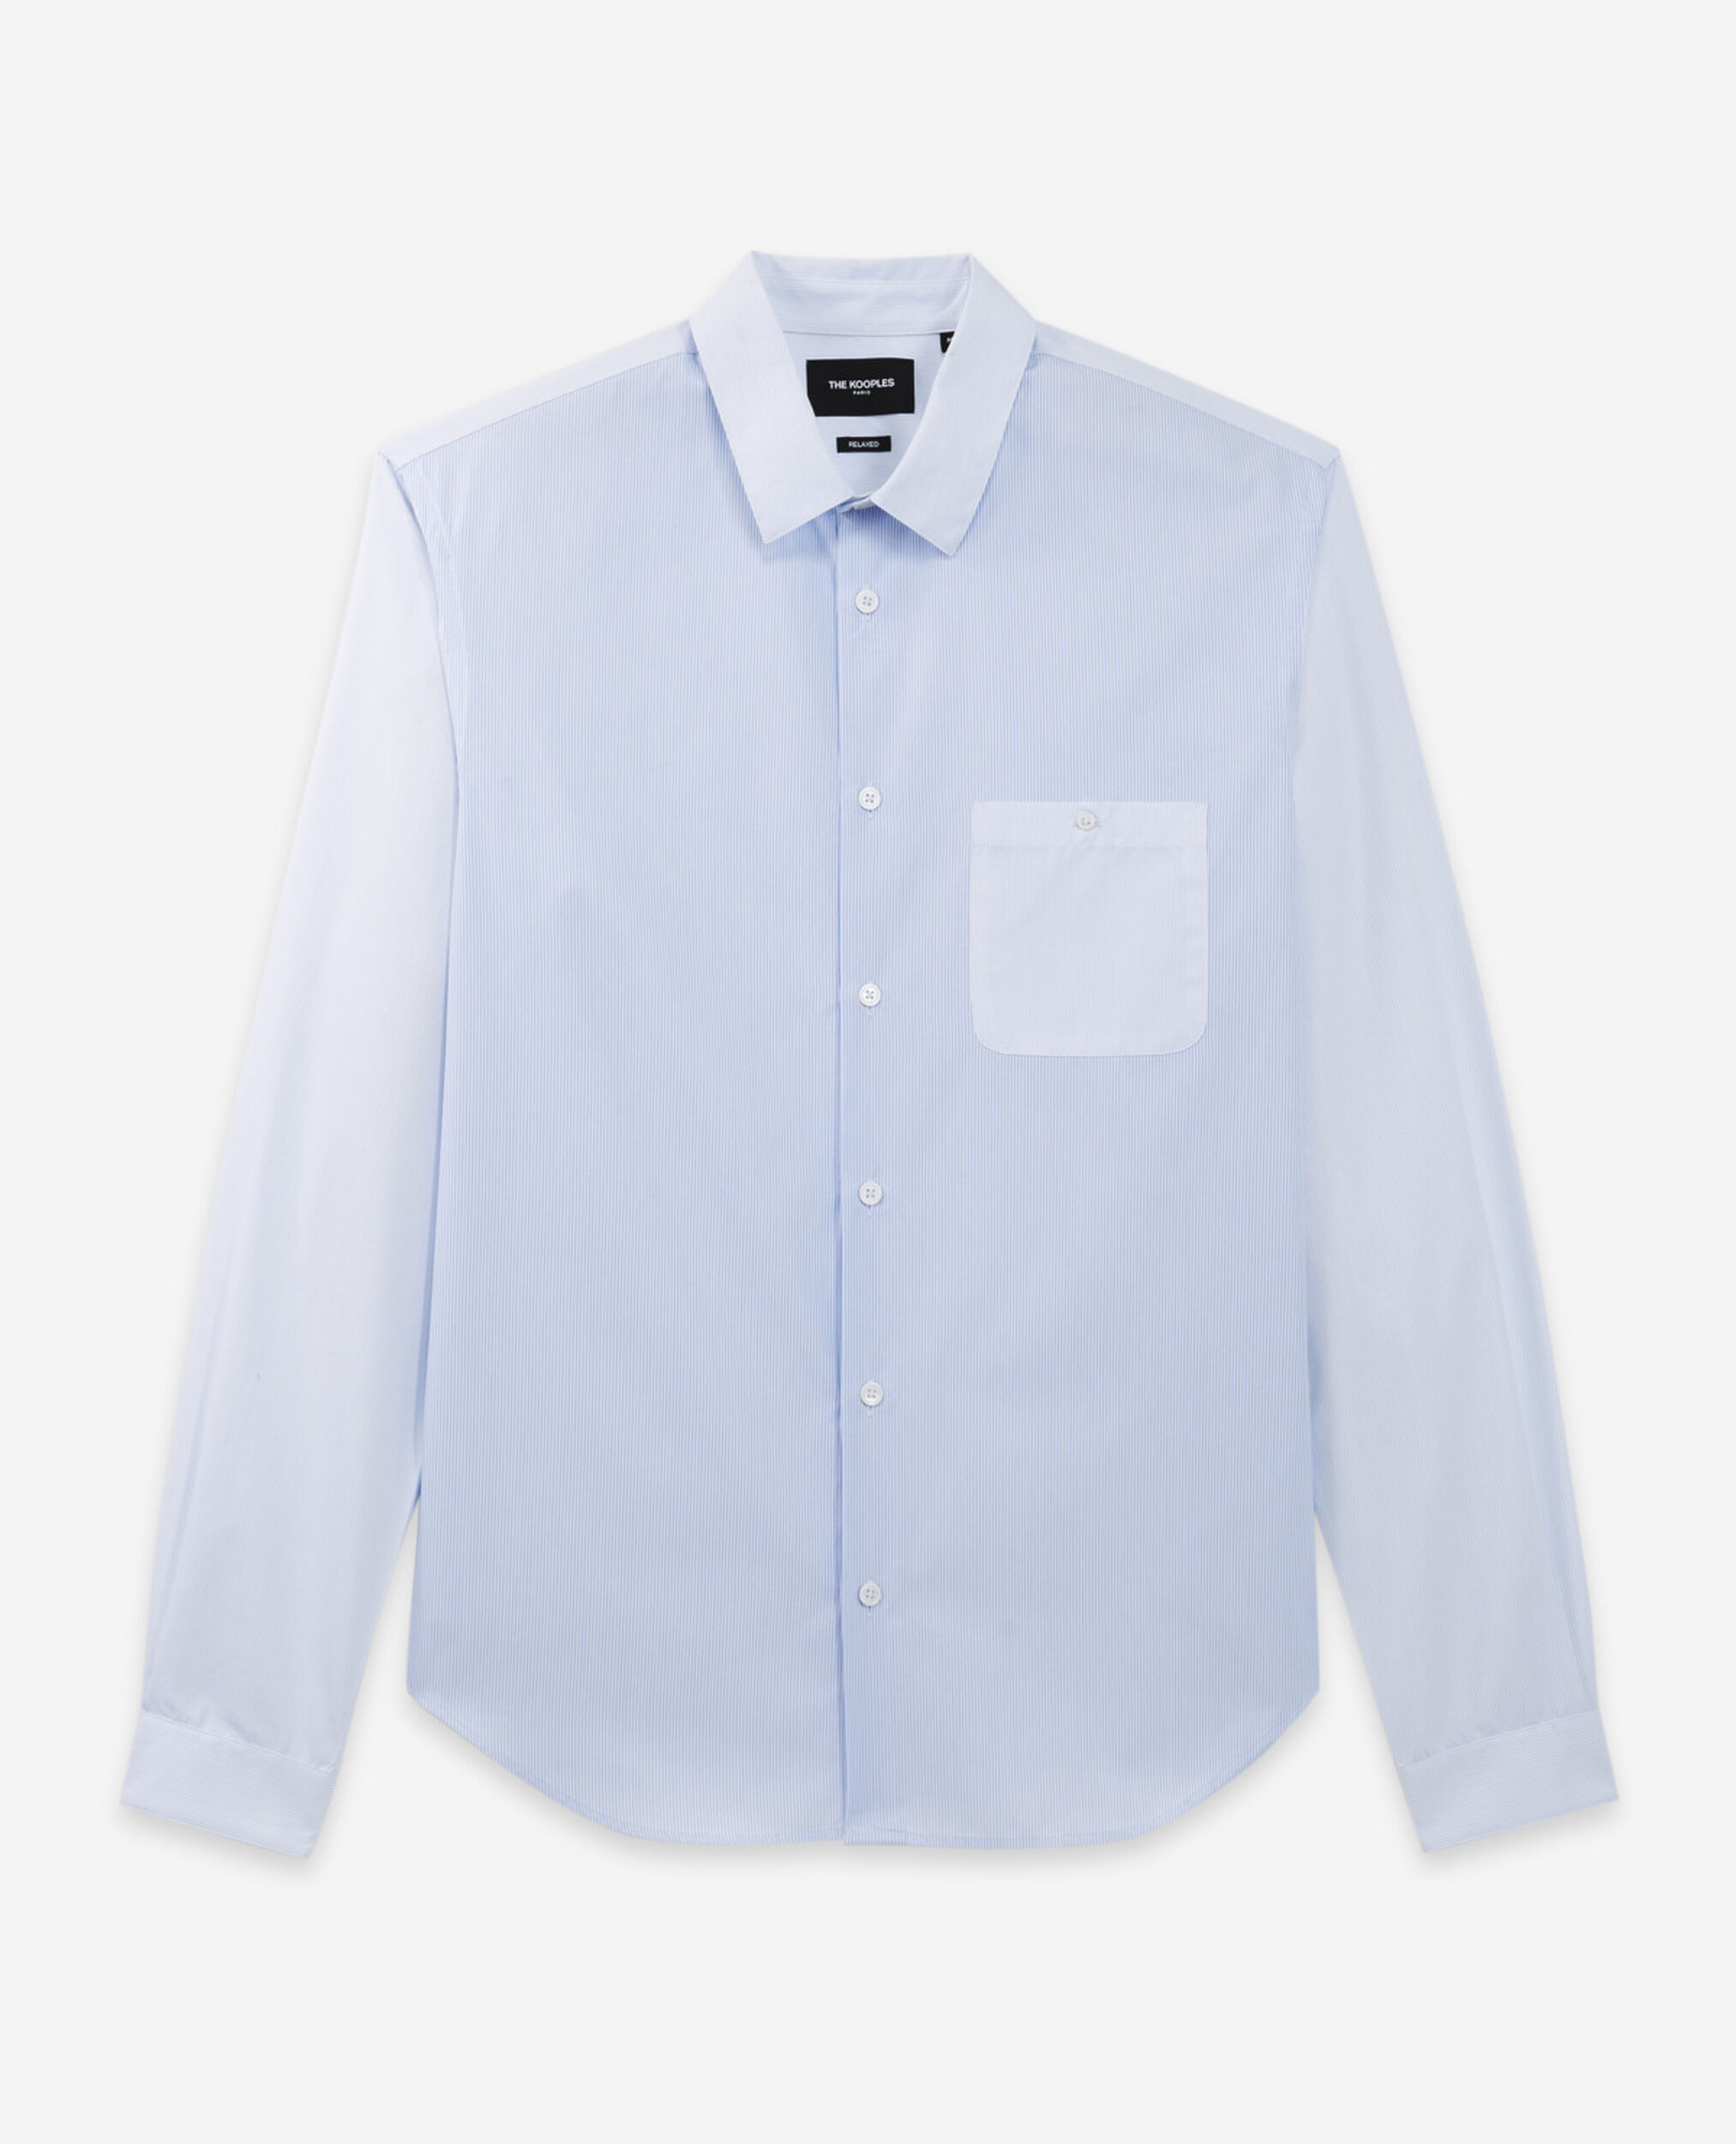 White collar shirt with sky blue stripes, WHITE / SKY BLUE, hi-res image number null